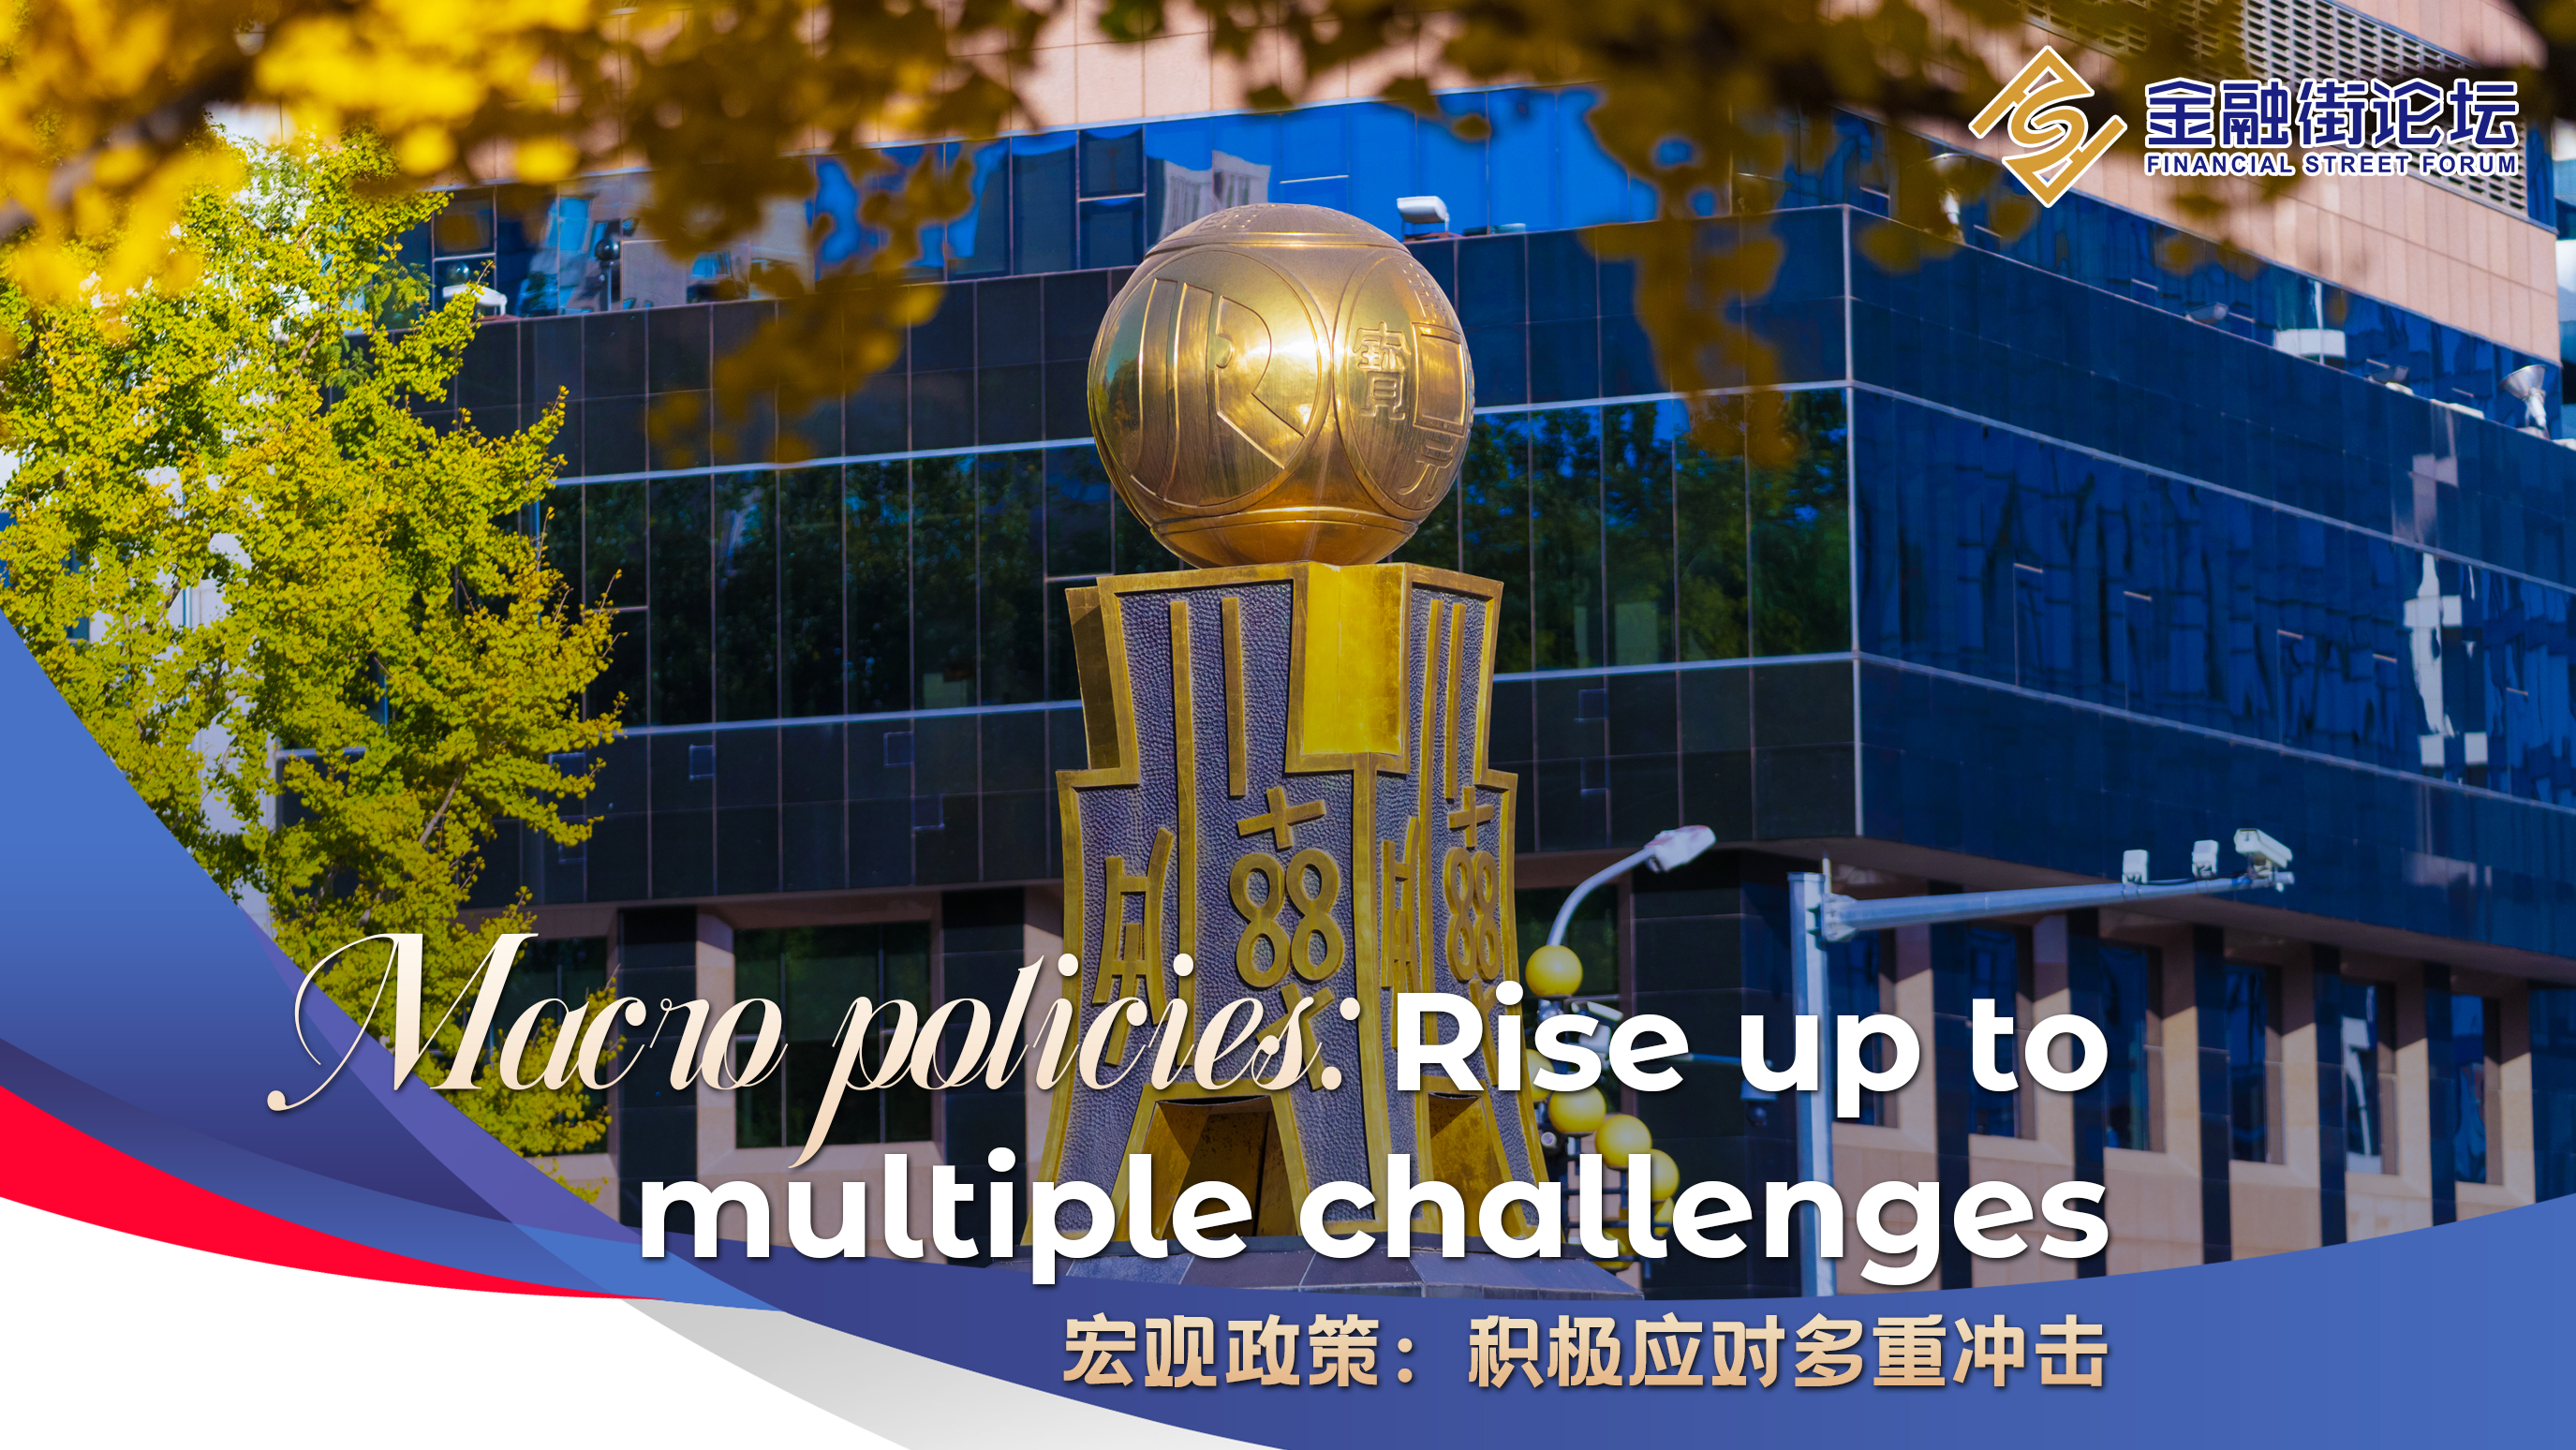 Live: Macro policies - Rise up to multiple challenges